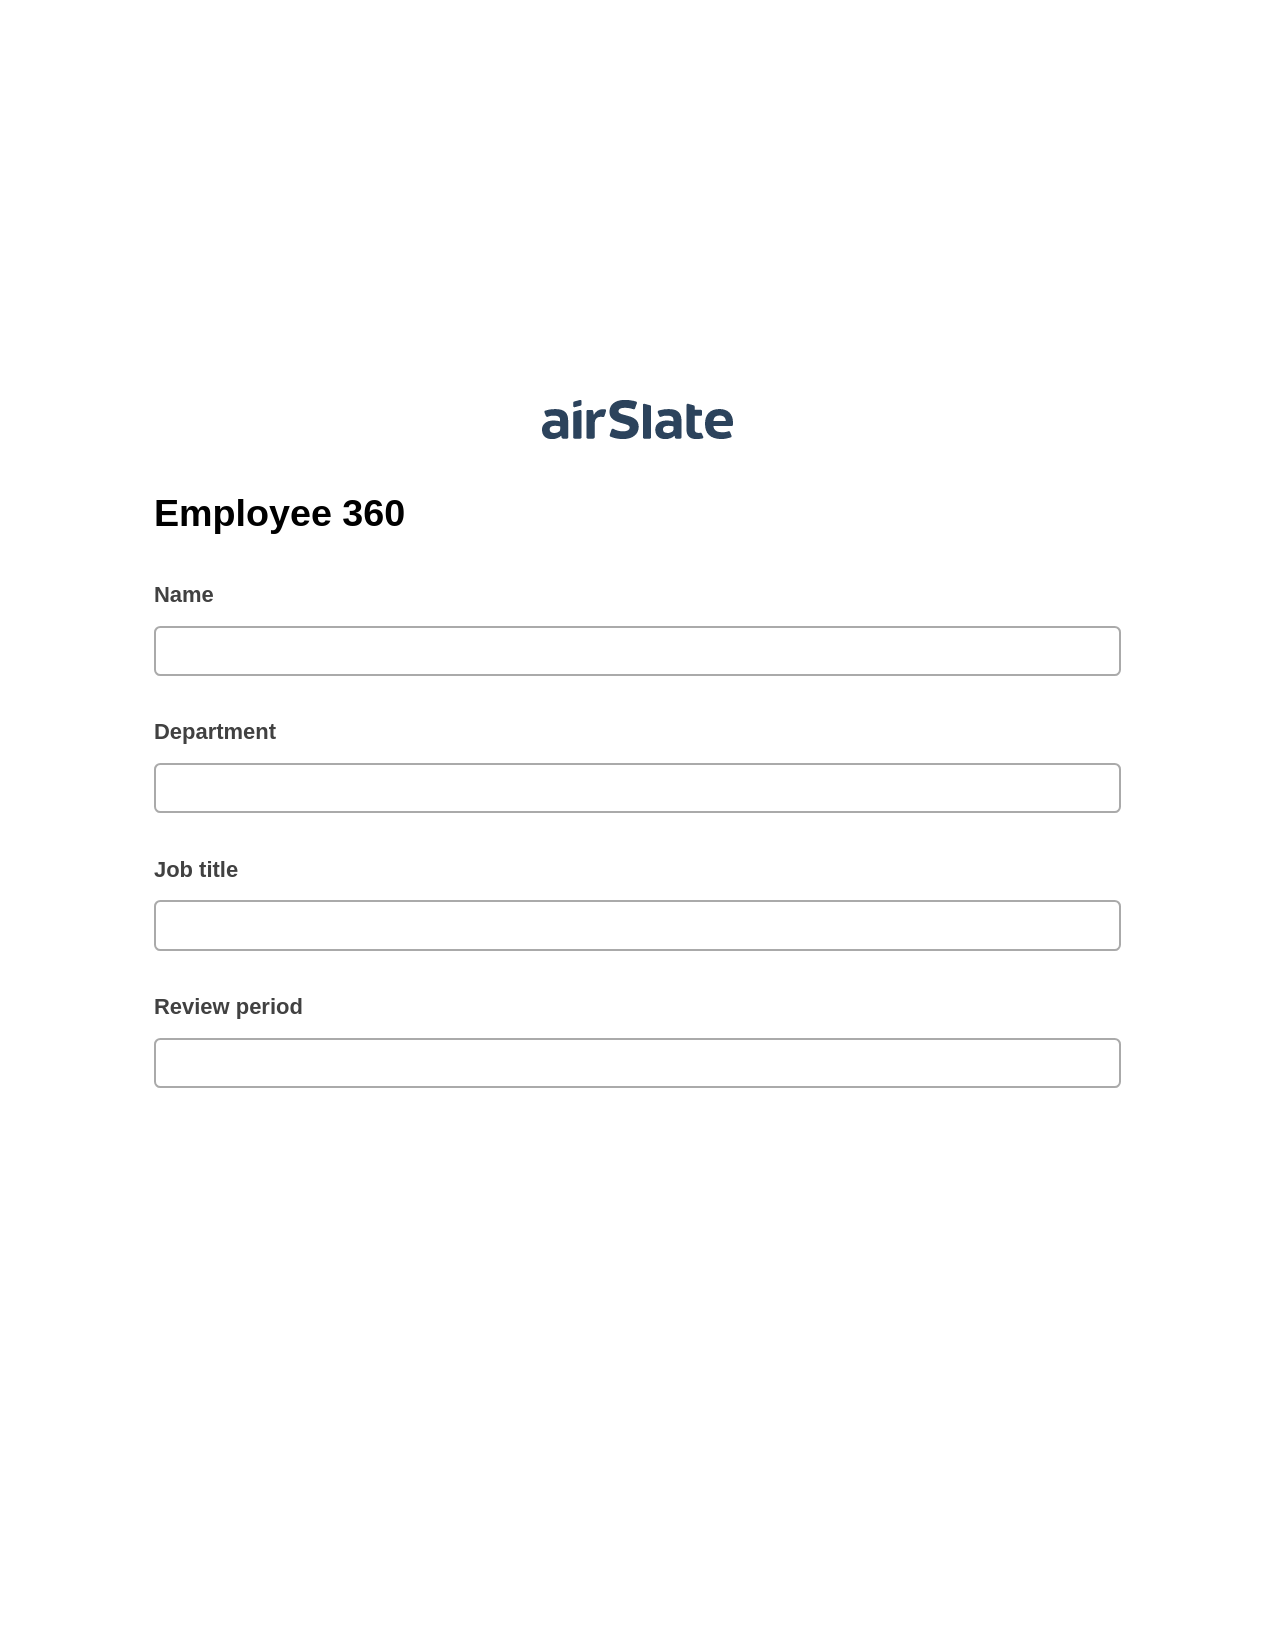 Multirole Employee 360 Pre-fill from Excel Spreadsheet Bot, Lock the Slate Bot, Export to NetSuite Bot